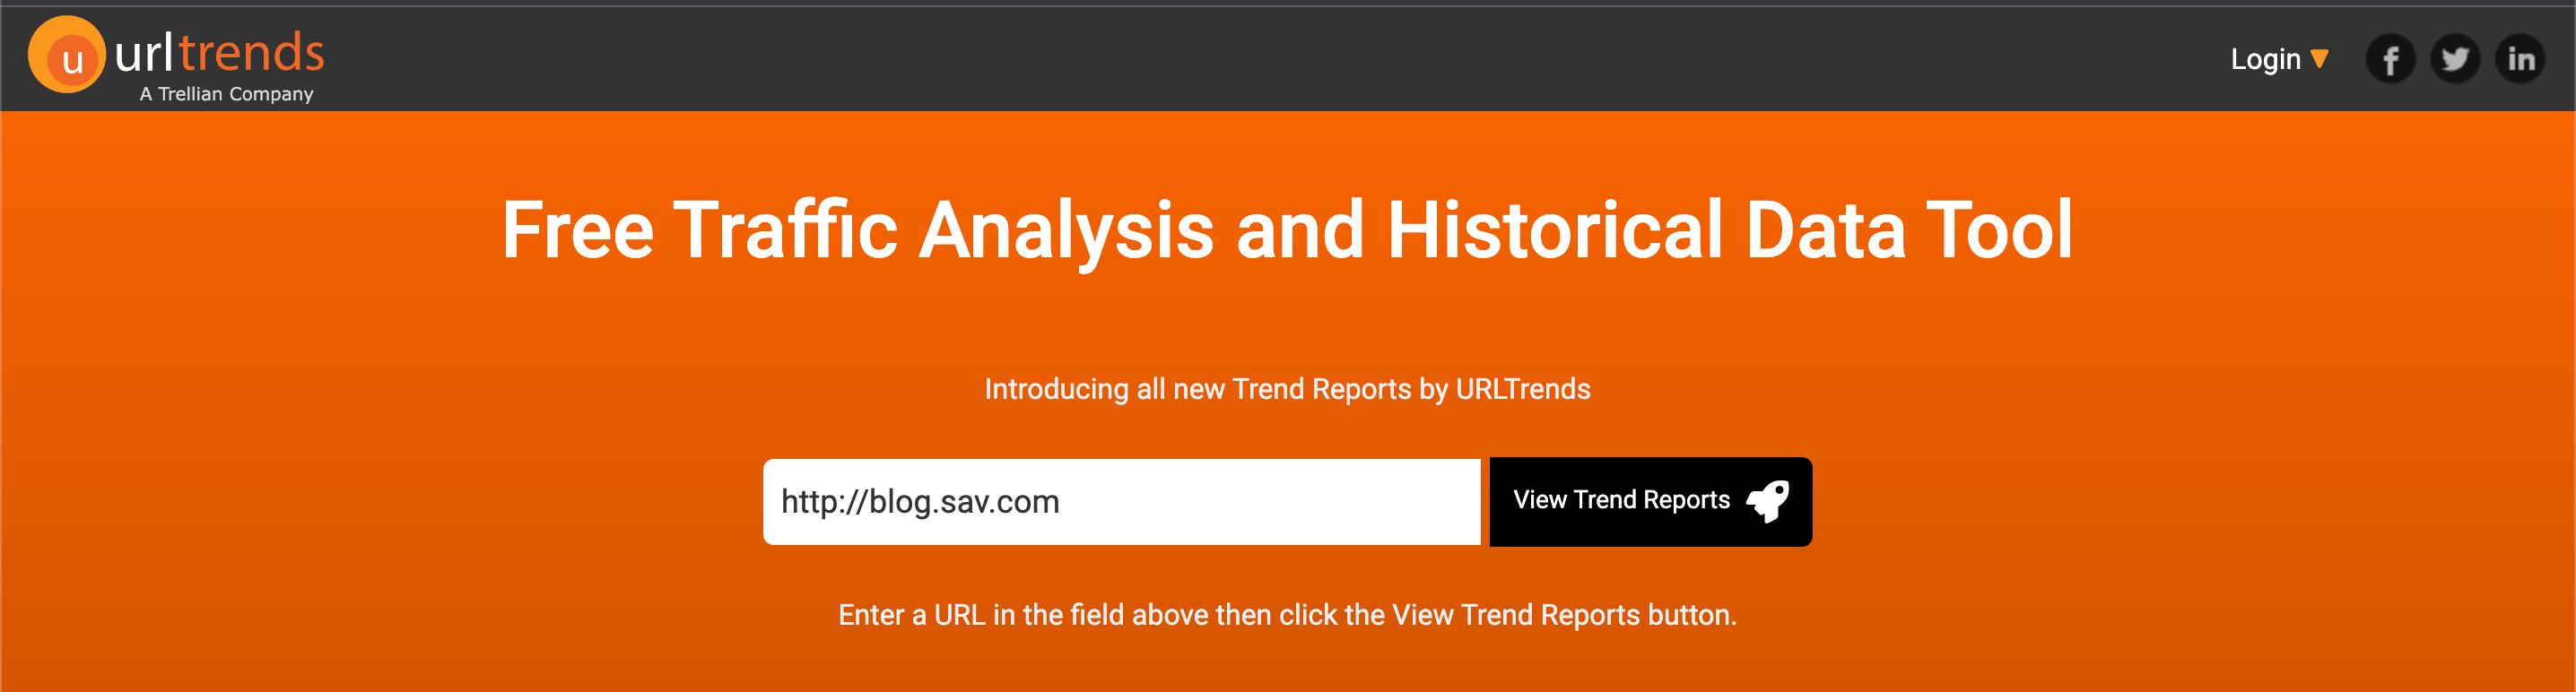 The home page for URL trends